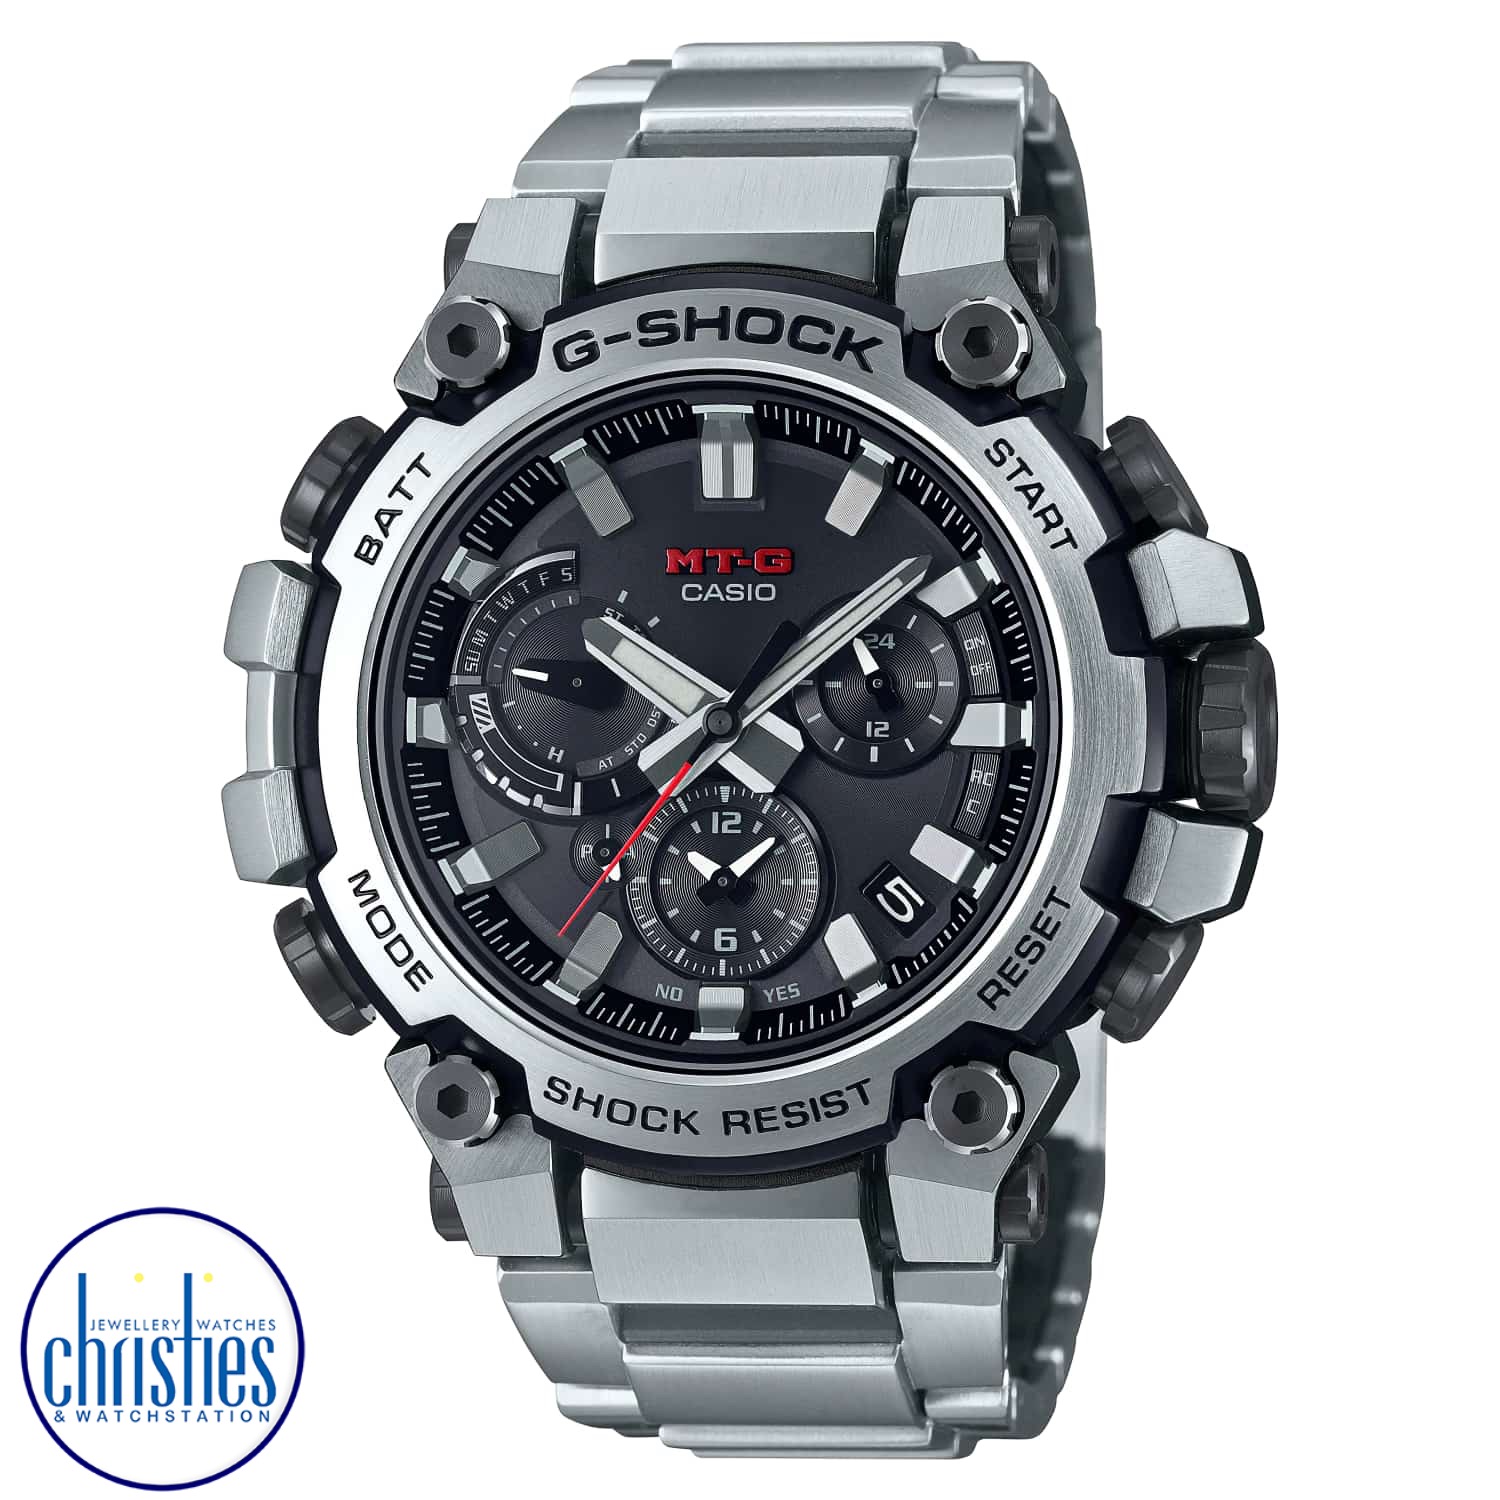 MTGB3000D-1A G-Shock Bluetooth Tough Solar Watch. Discover innovative form of great structural beauty, MT-G timepieces born of an entirely new design concept combining the resin used in the first G-SHOCK models with metal materials. g shock watches price